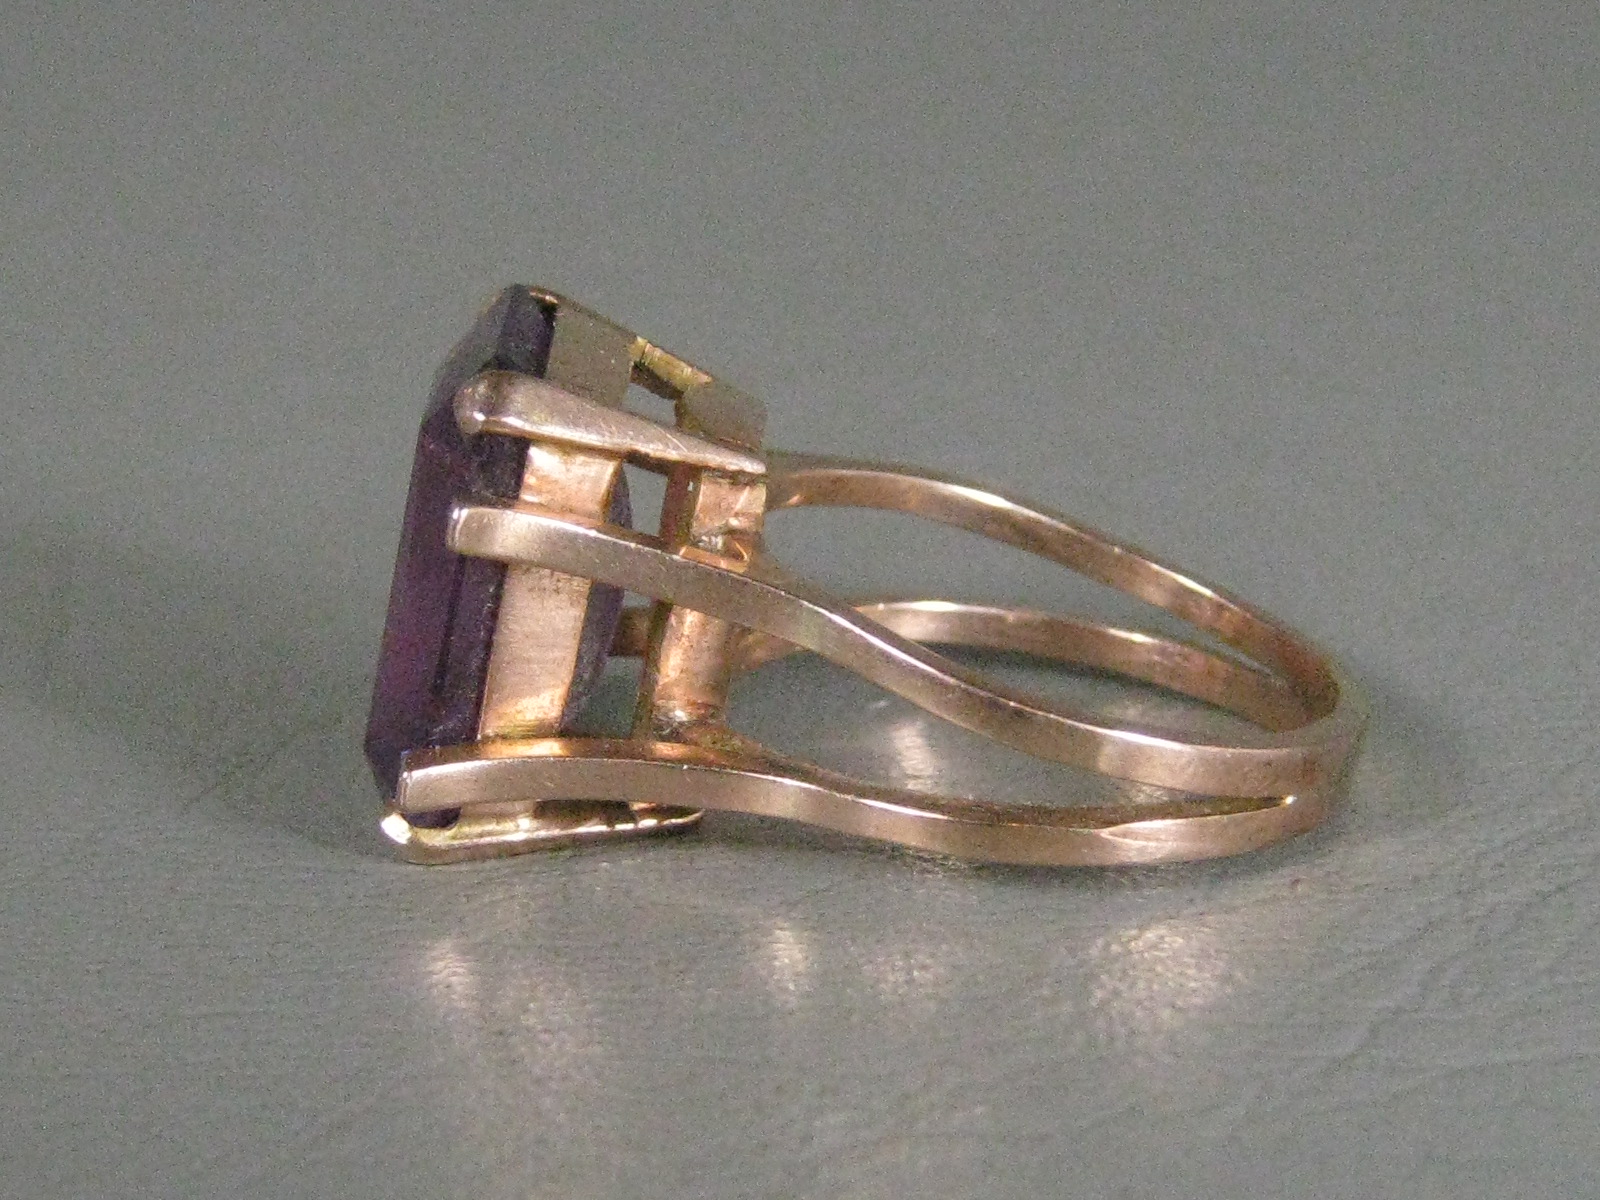 Vintage Antique Amethyst Ring Size 8.25 Estate Jewelry Rose Gold? No Reserve! 7